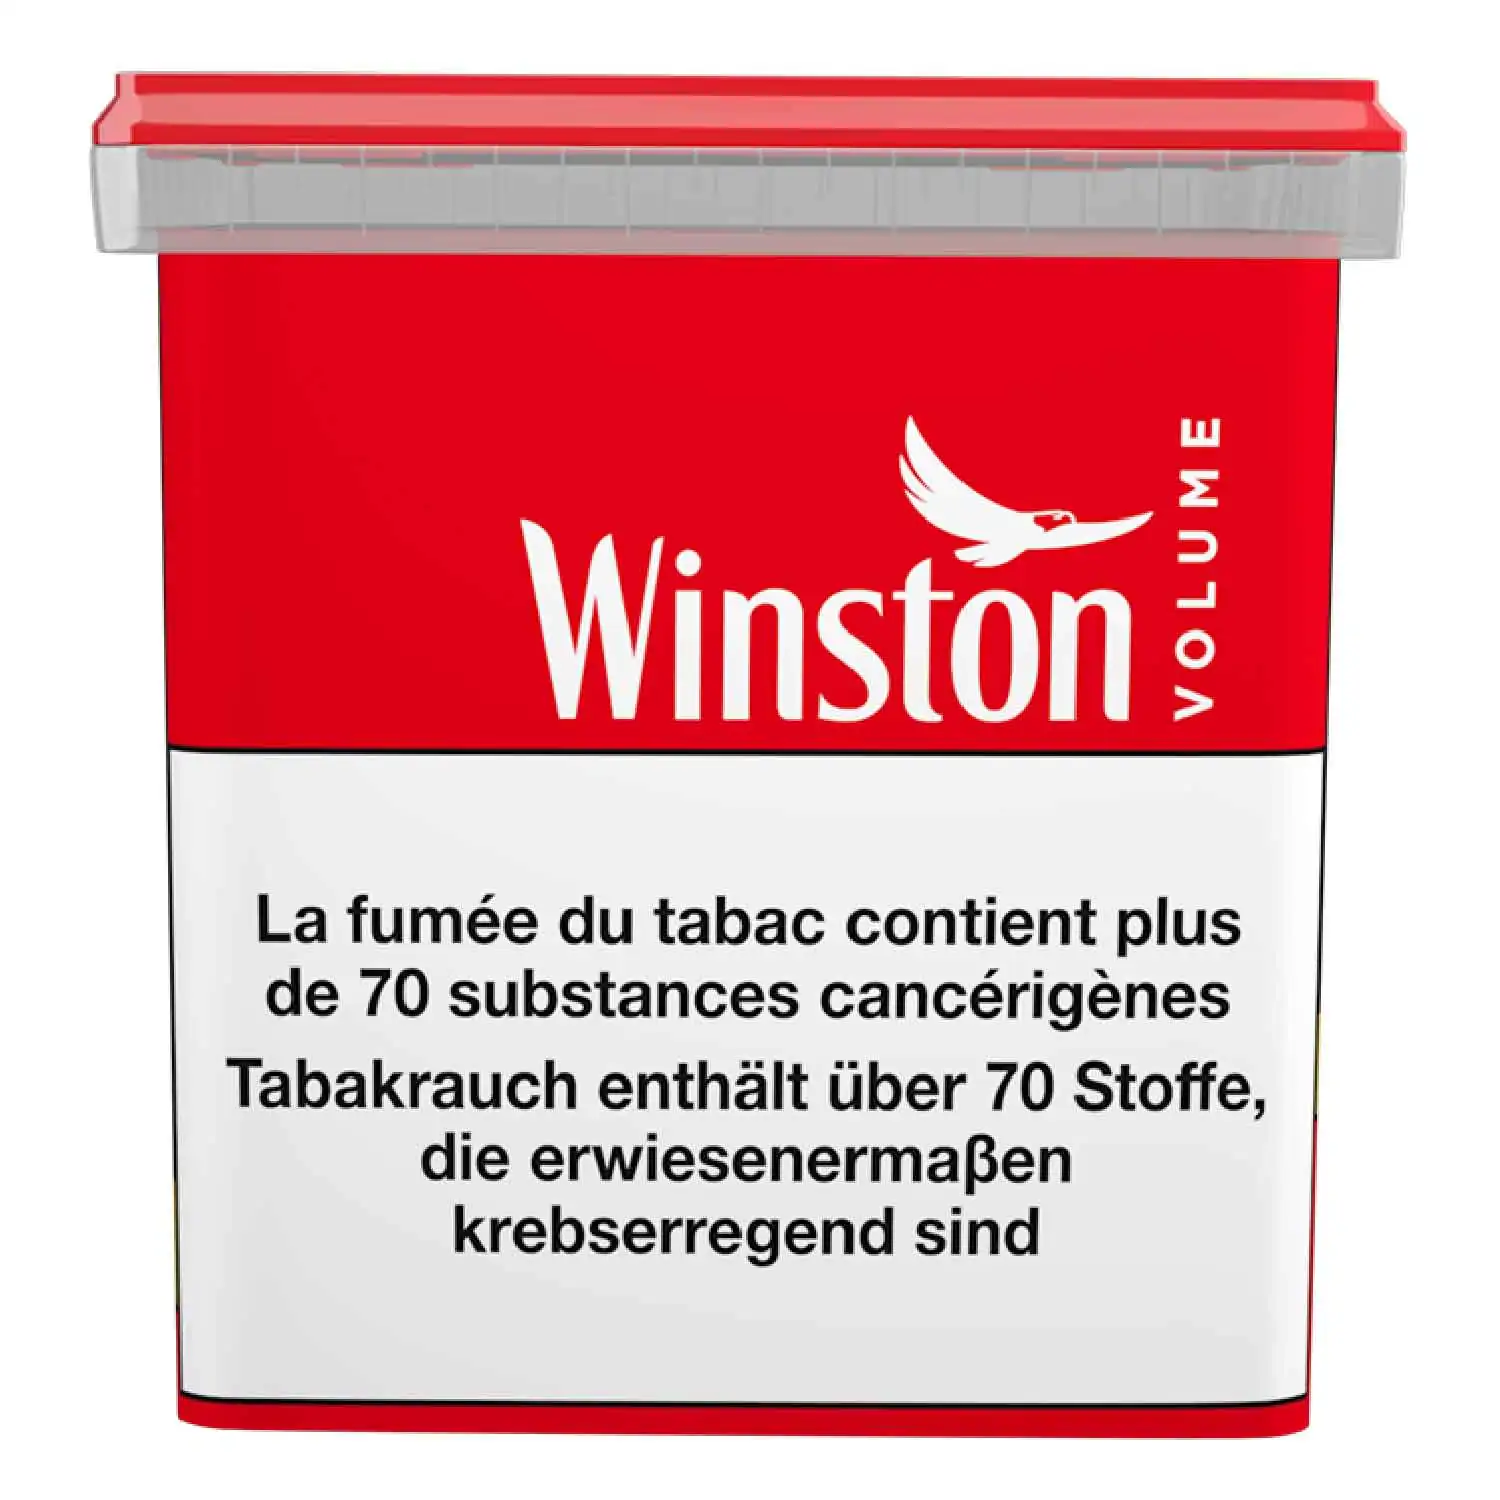 Winston volume rouge 500g - Buy at Real Tobacco